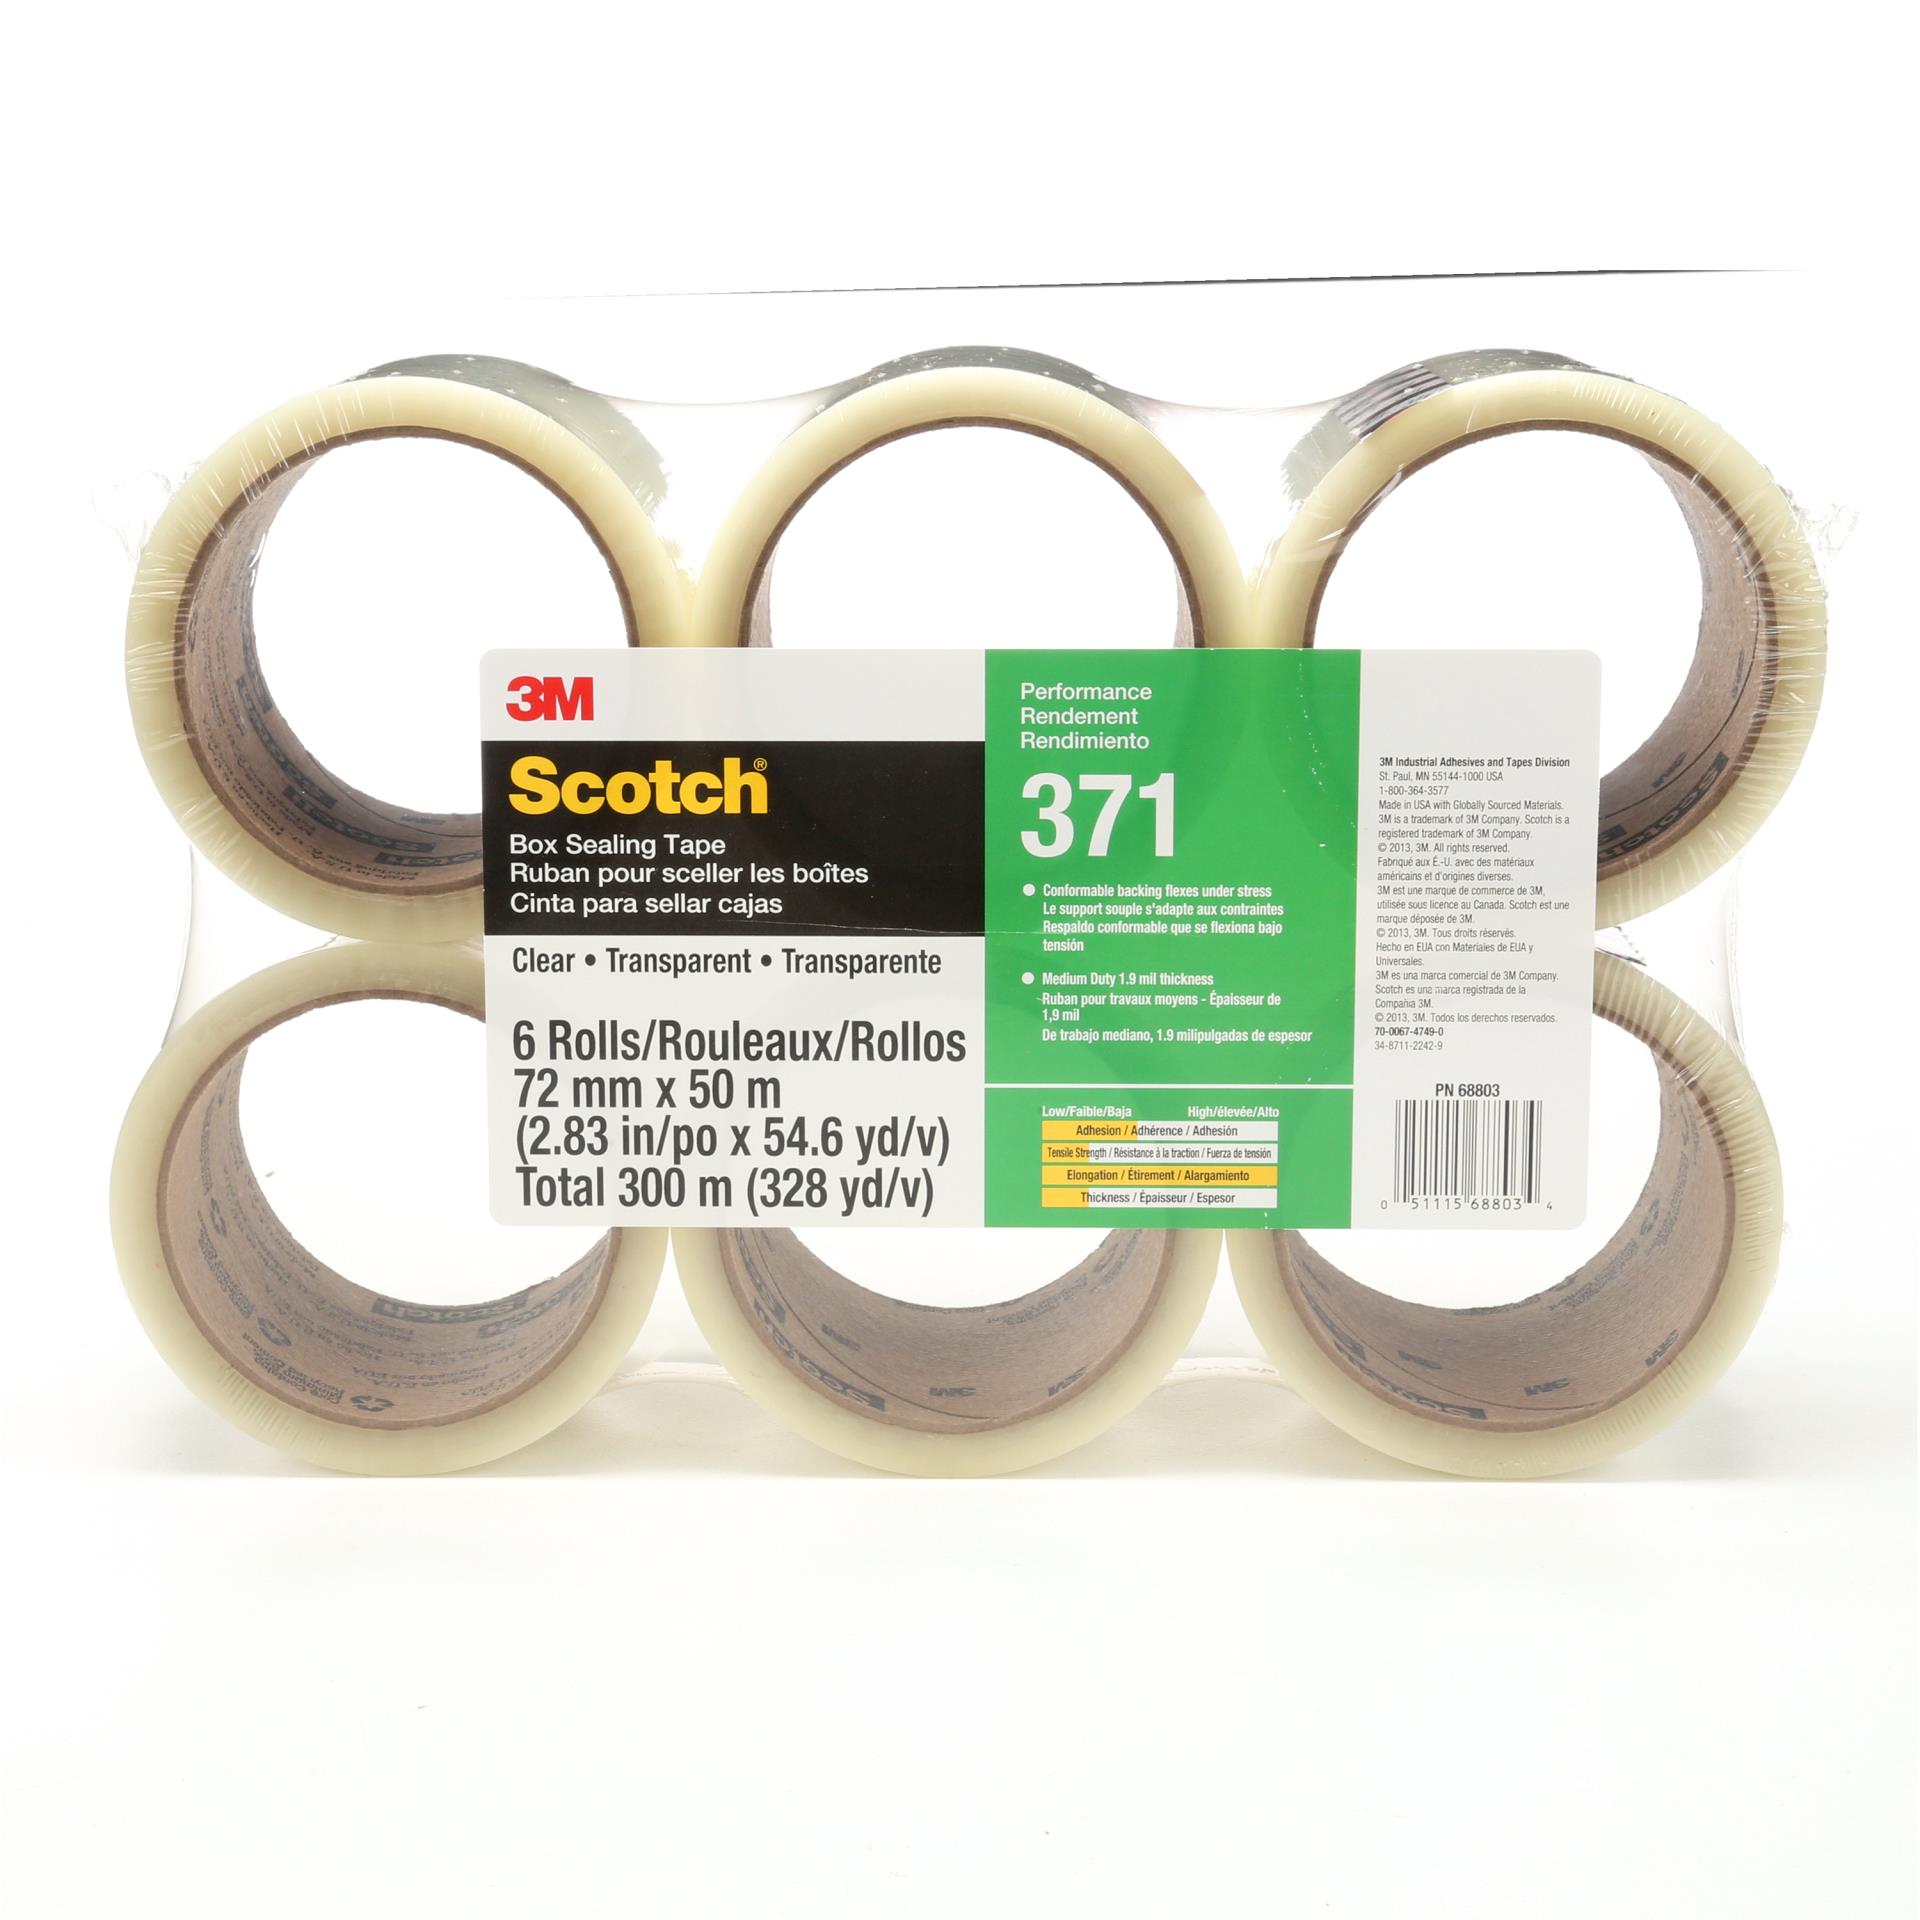 https://www.e-aircraftsupply.com/ItemImages/72/7010374972_Scotch_Performance_Box_Sealing_Tape_371_Clear.jpg